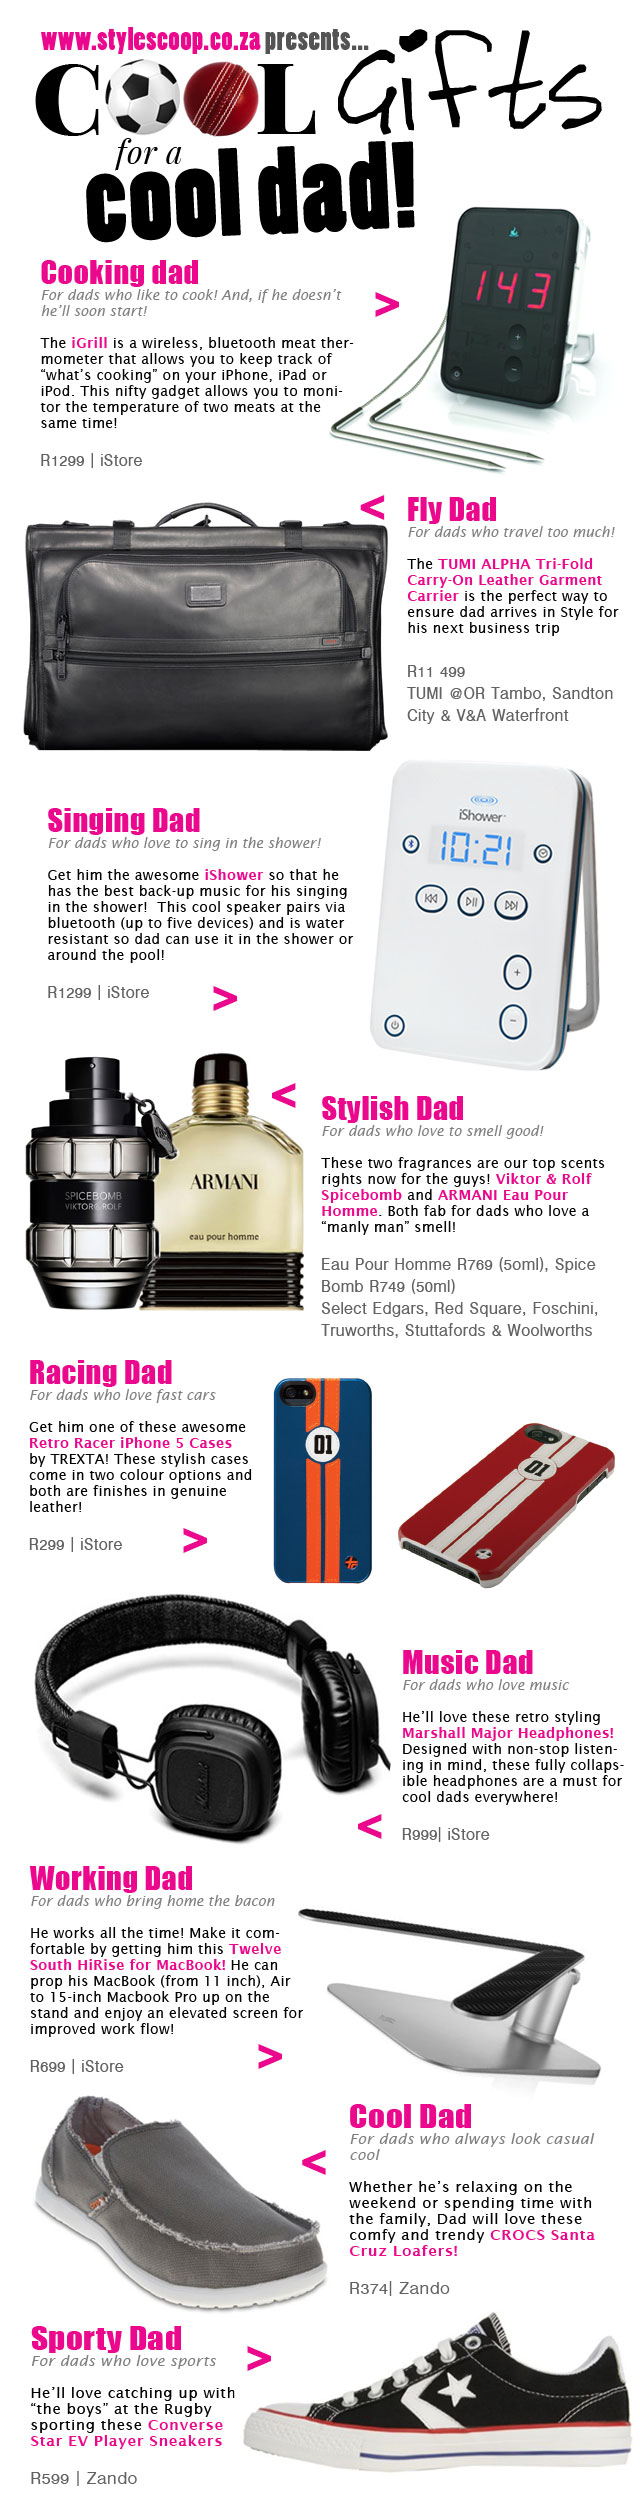 stylescoop-fathers-day-feature